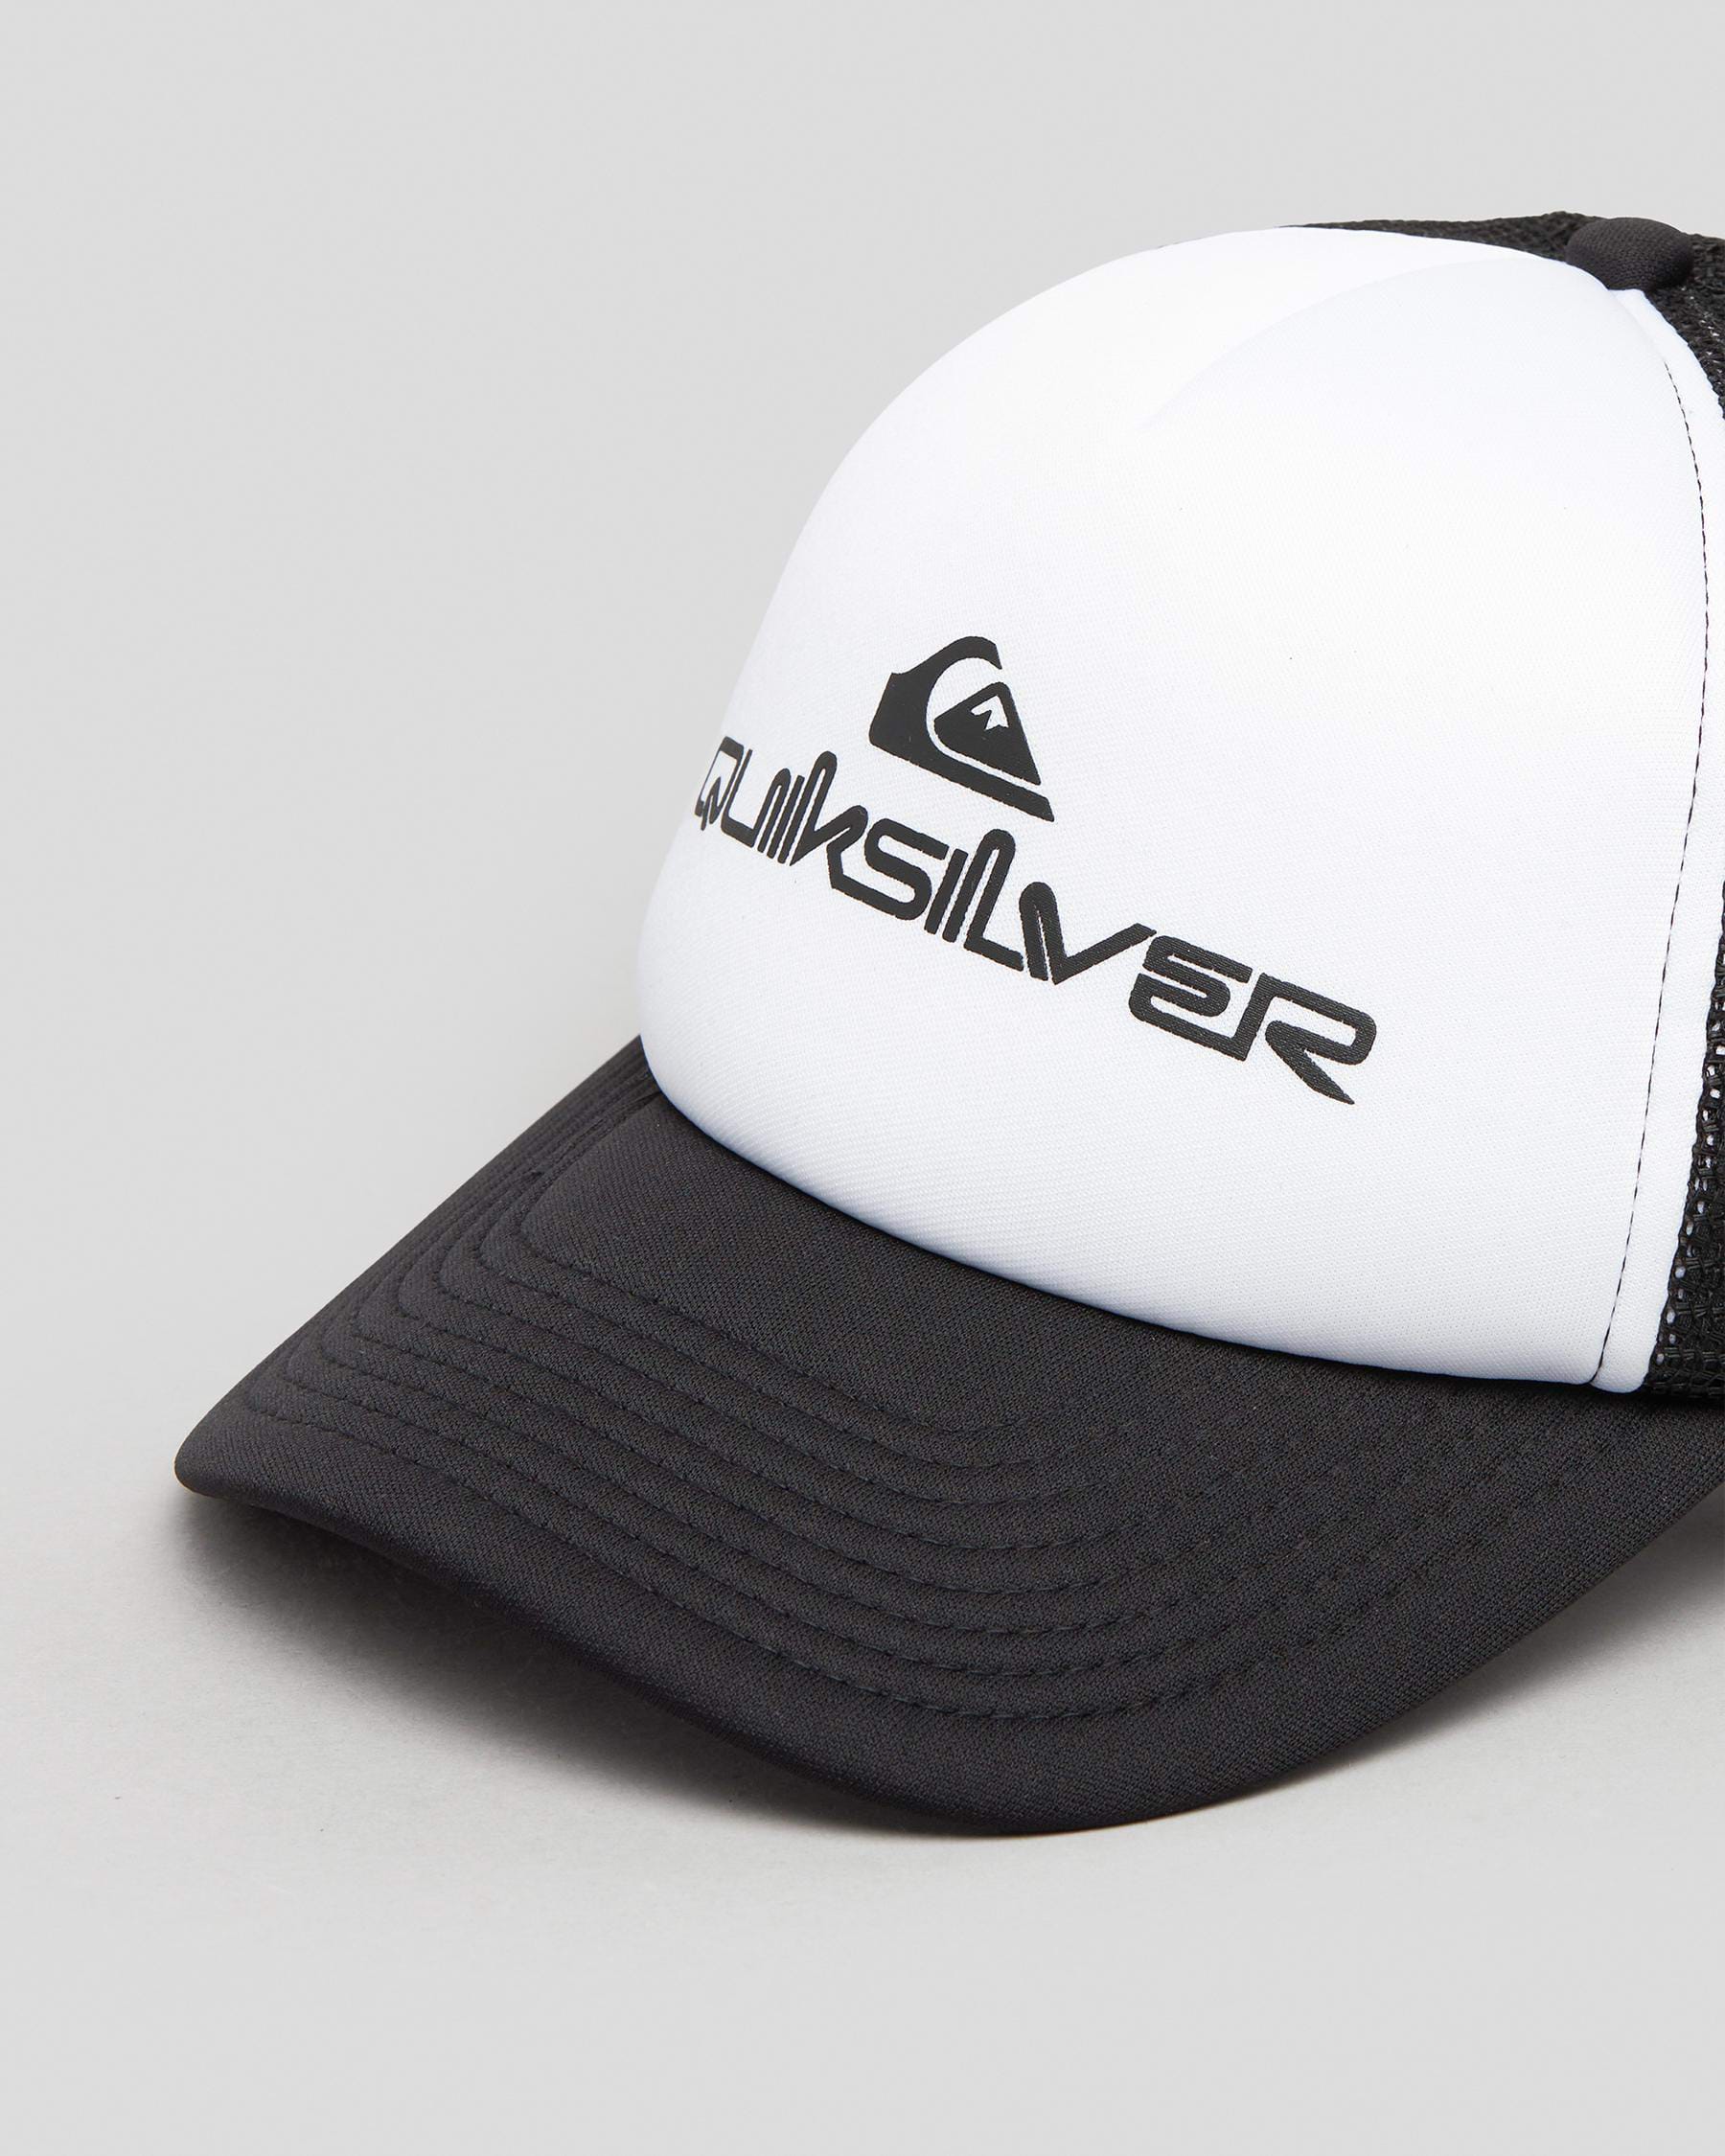 Quiksilver Omnistack Trucker Cap In White - FREE* Shipping & Easy Returns -  City Beach United States